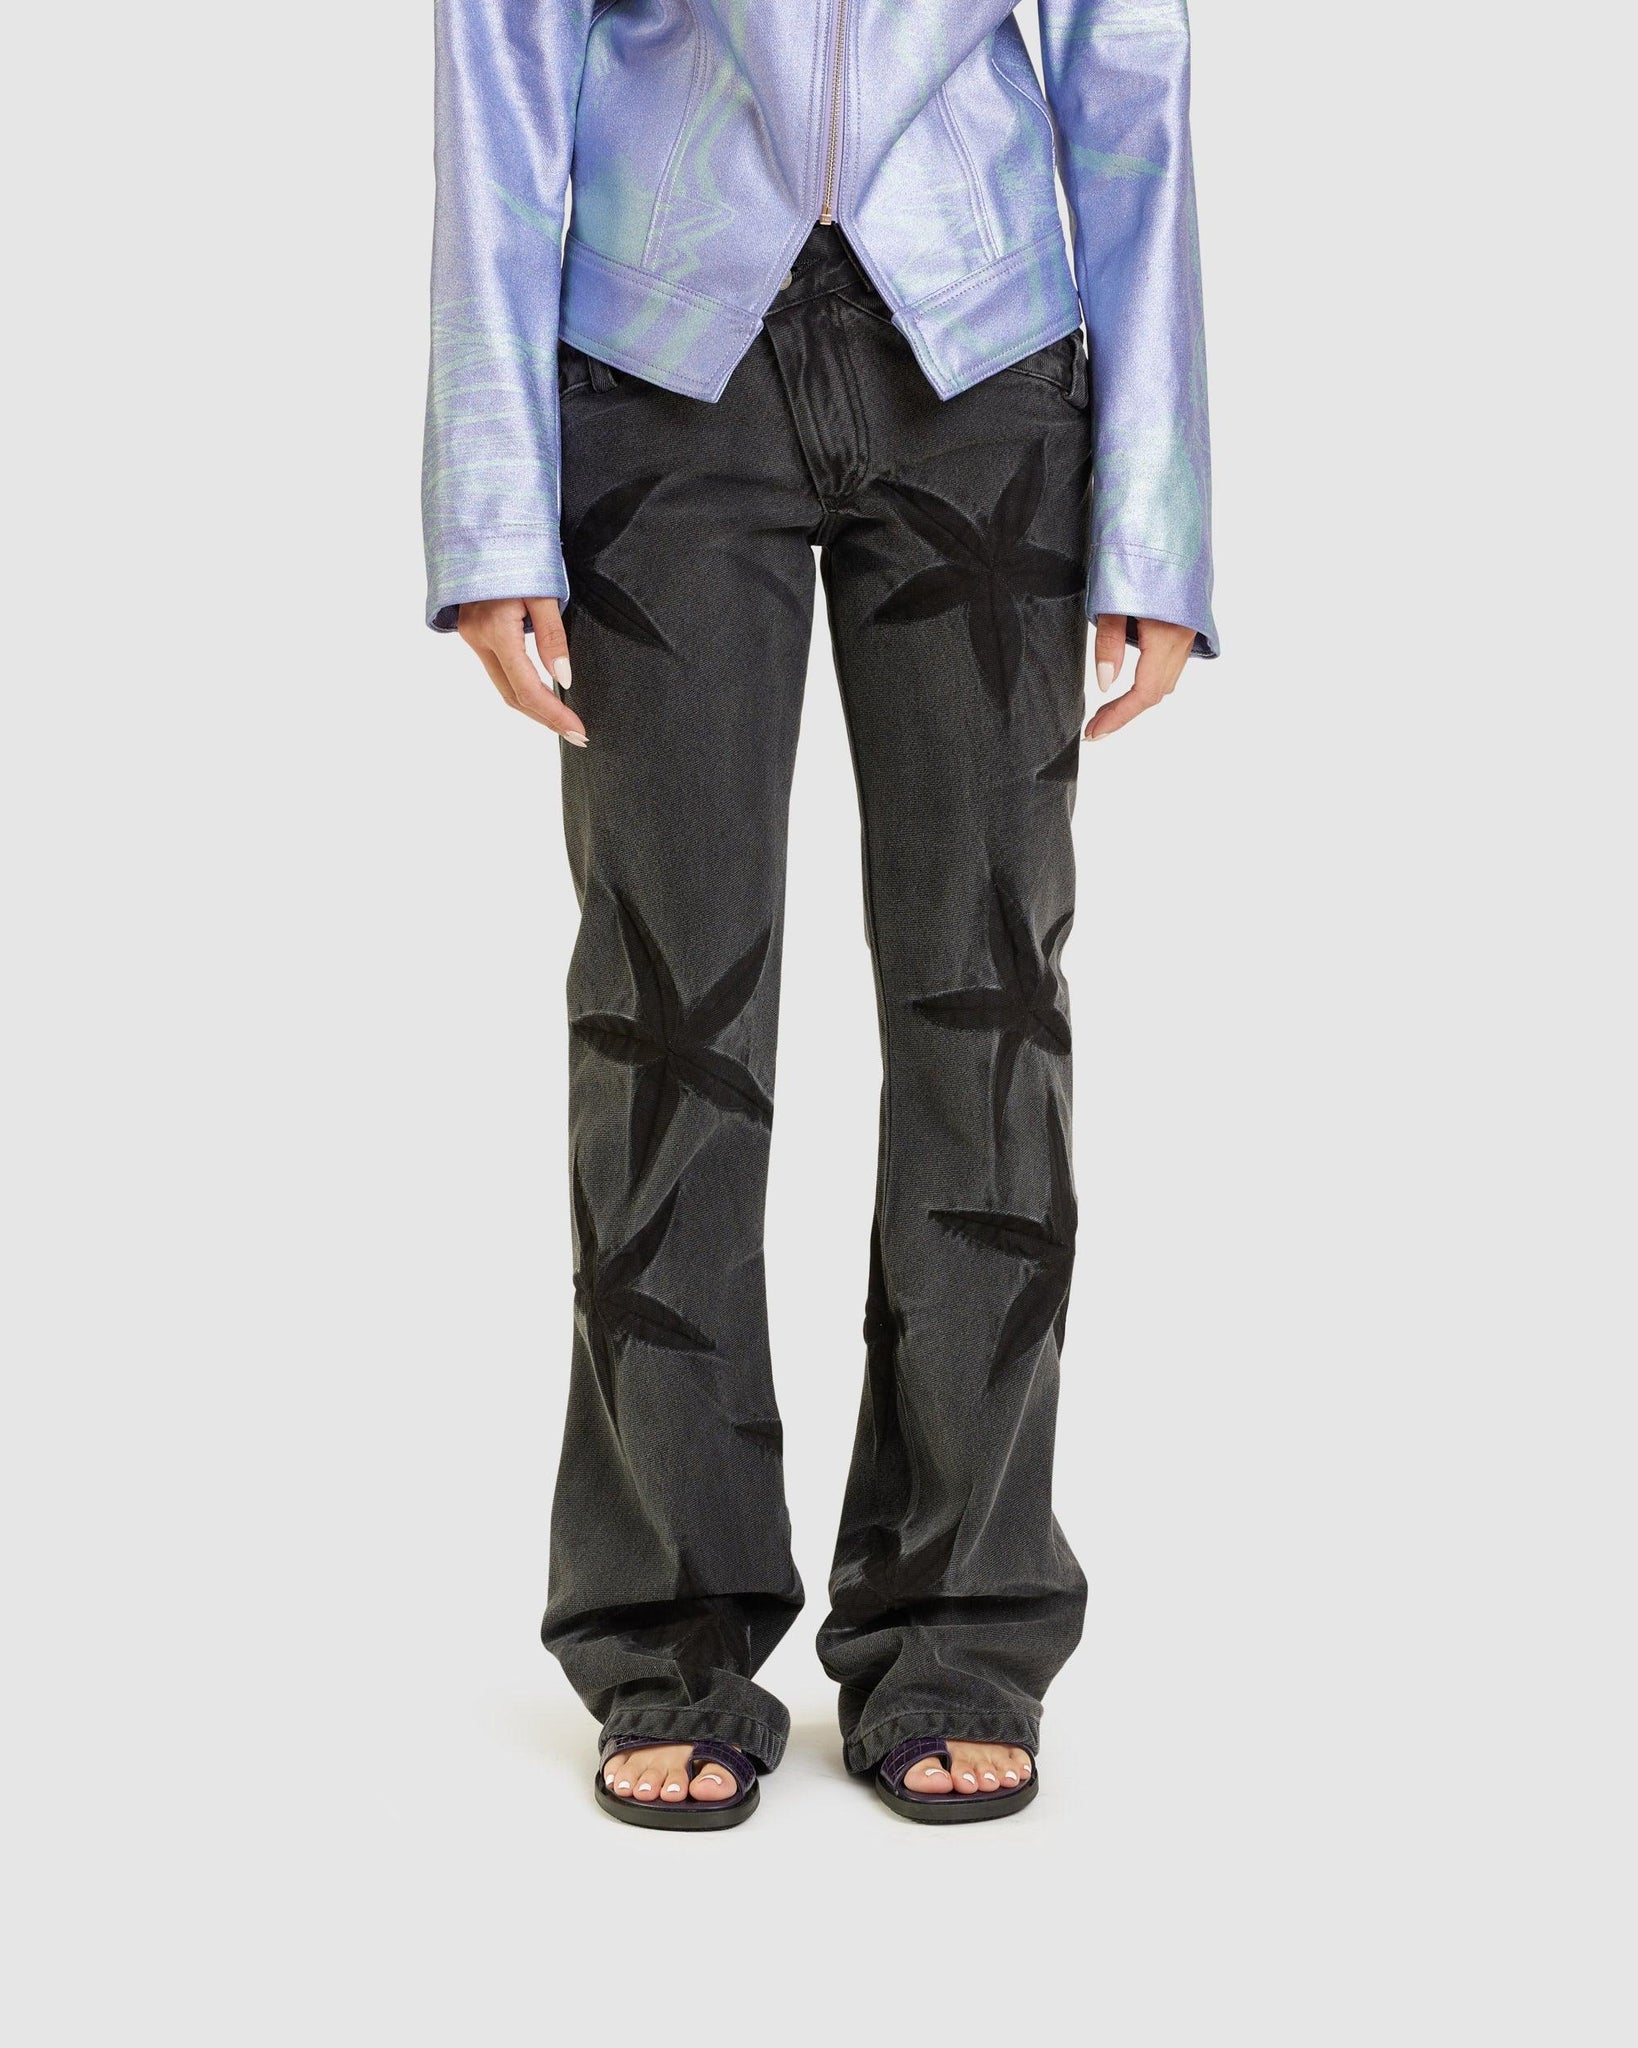 Night Flower Jeans - {{ collection.title }} - Chinatown Country Club 